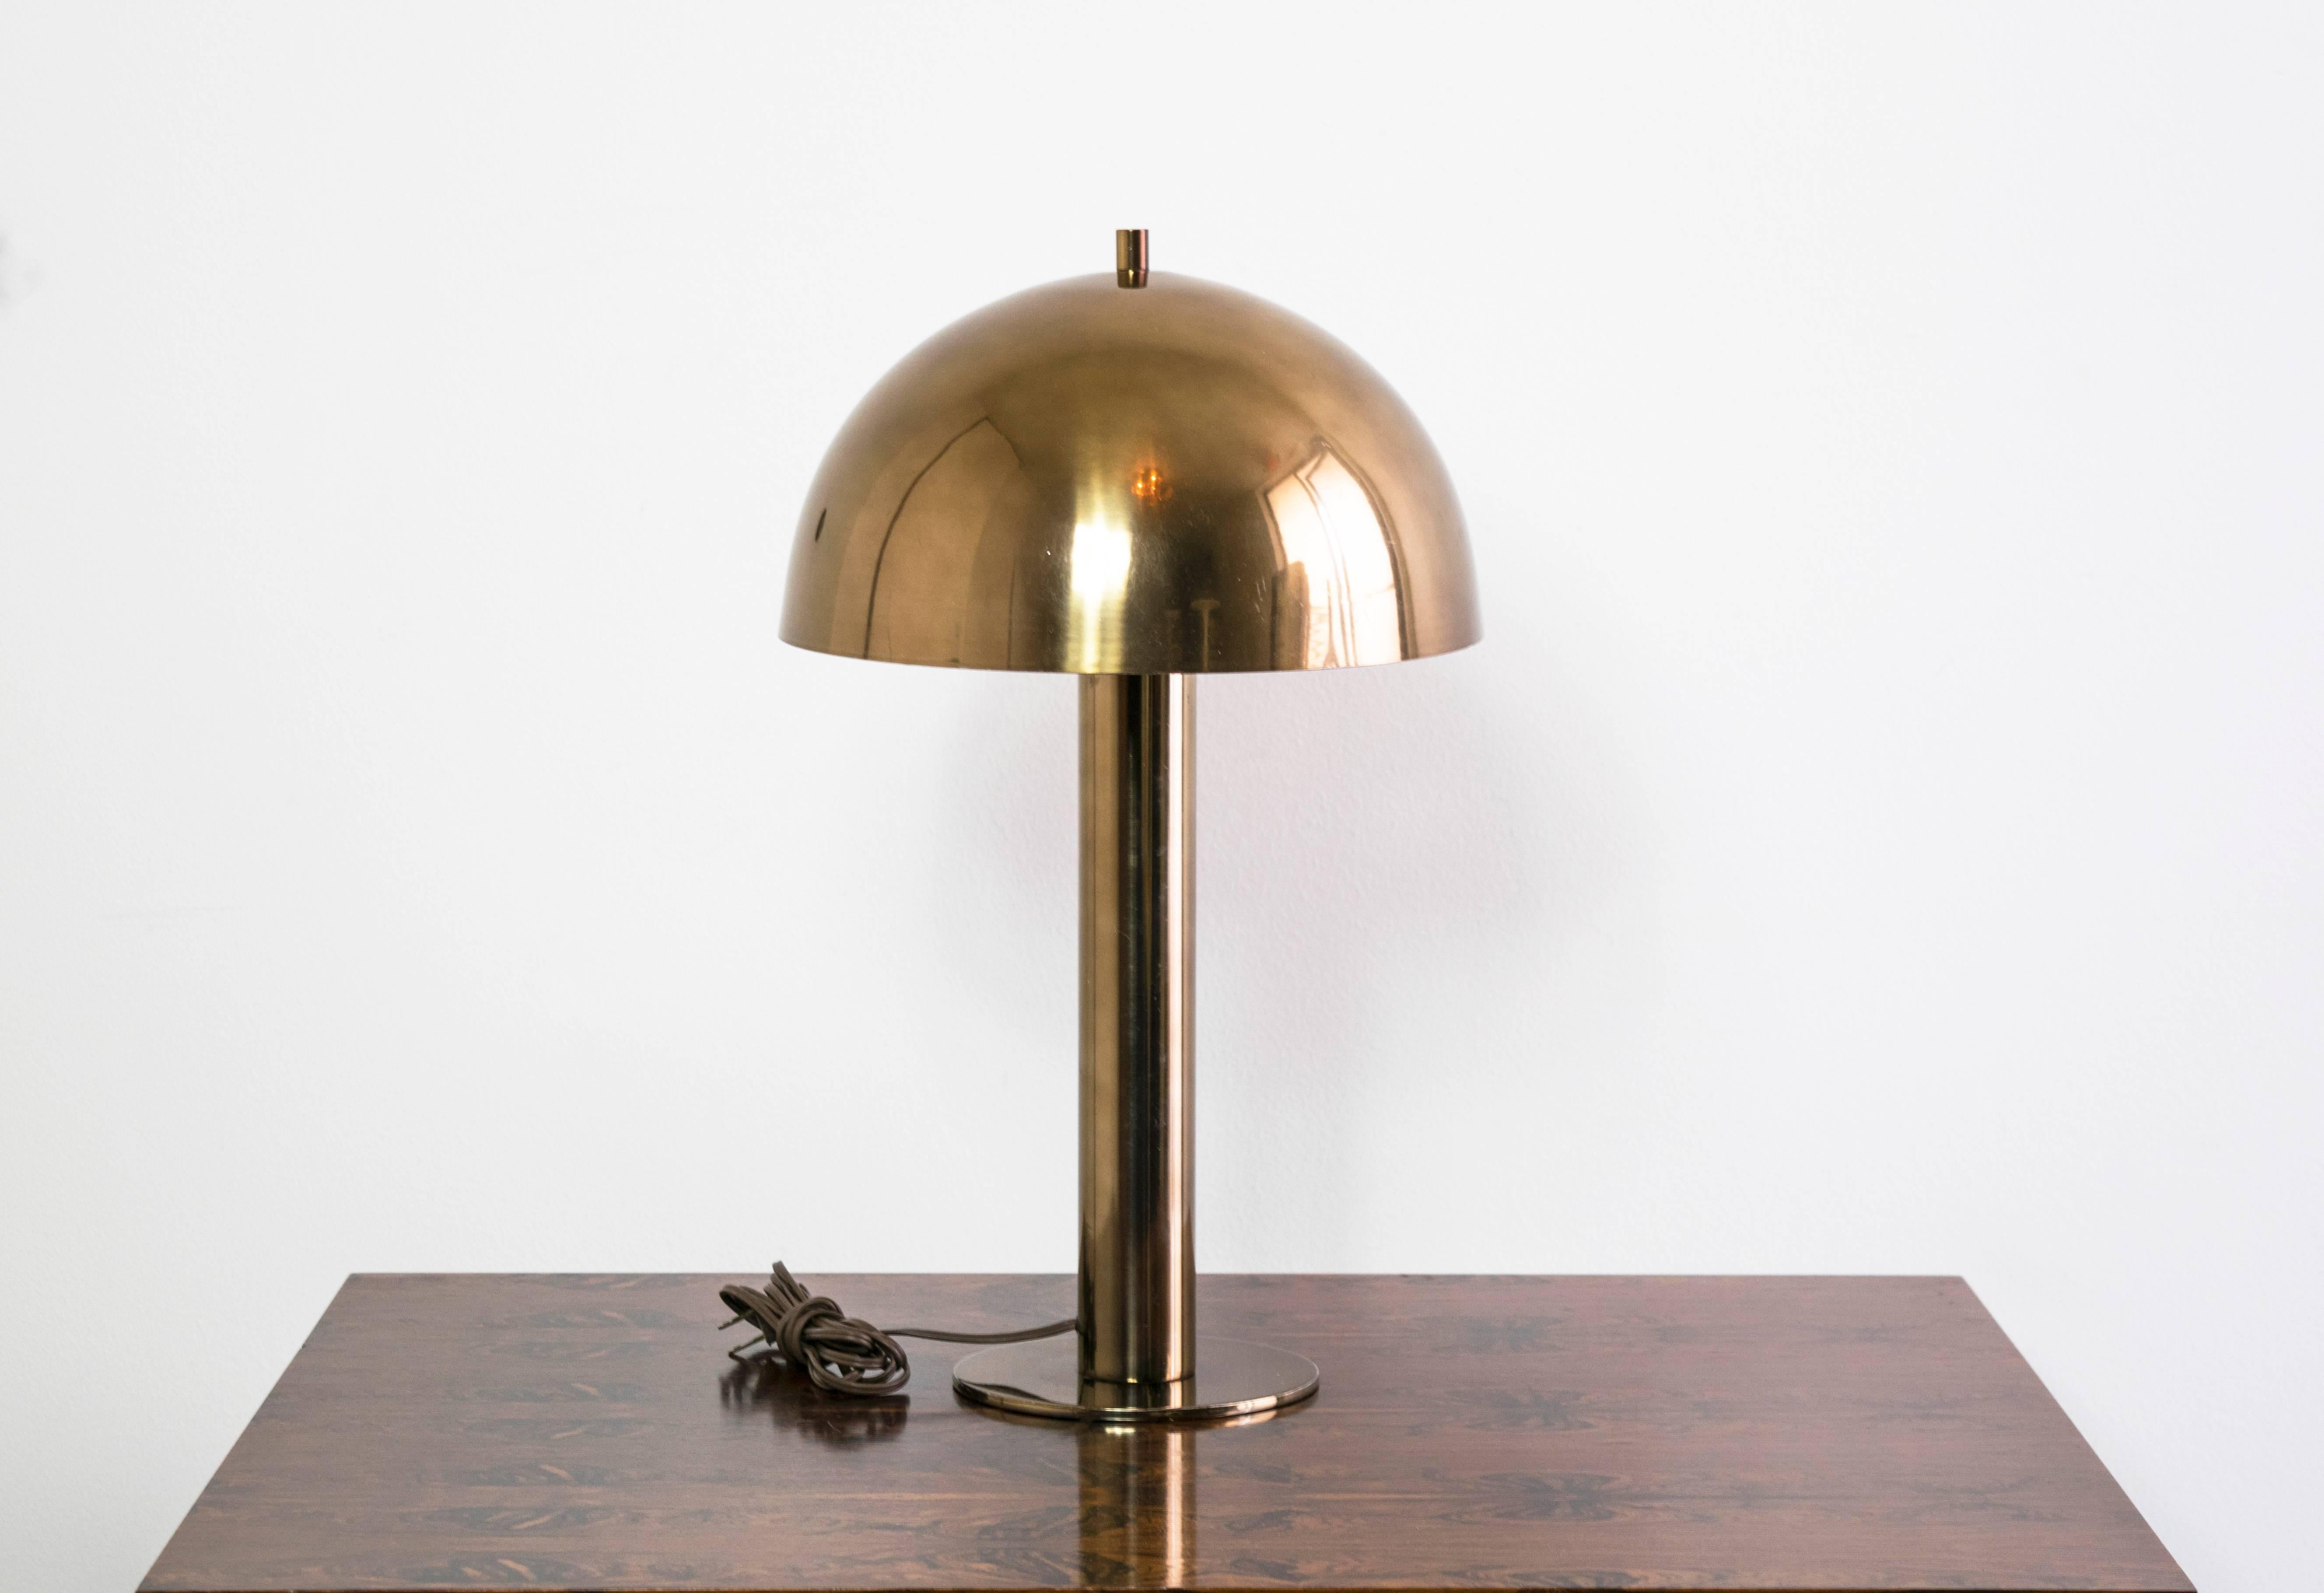 Classic Laurel mushroom design from the 1960s, this copper toned lamp is a rare color way.